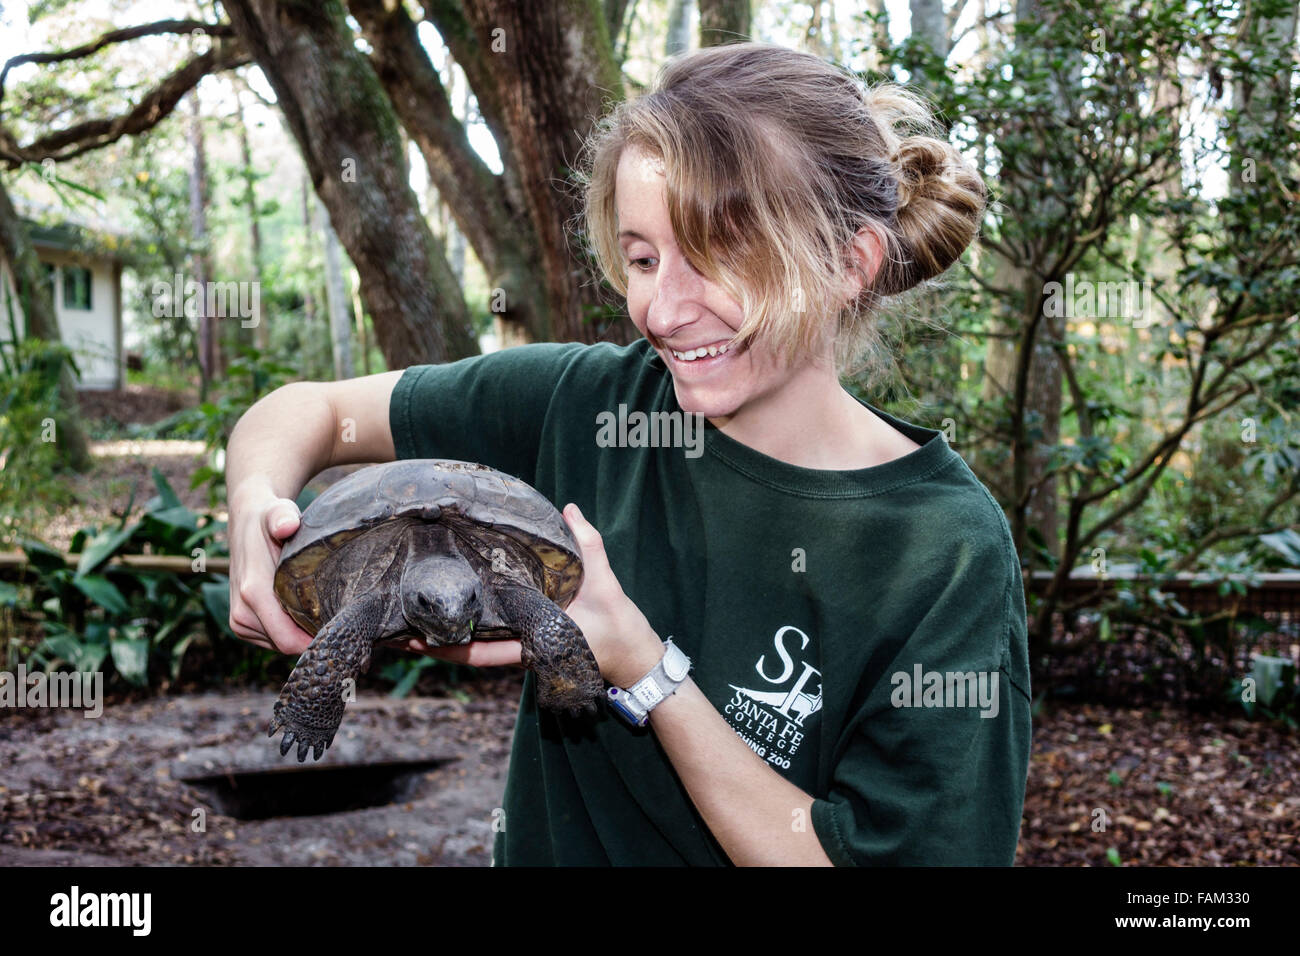 Gainesville Florida,Santa Fe College Teaching Zoo,student students education pupil pupils,teen teens teenage teenager teenagers youth adolescent,girl Stock Photo